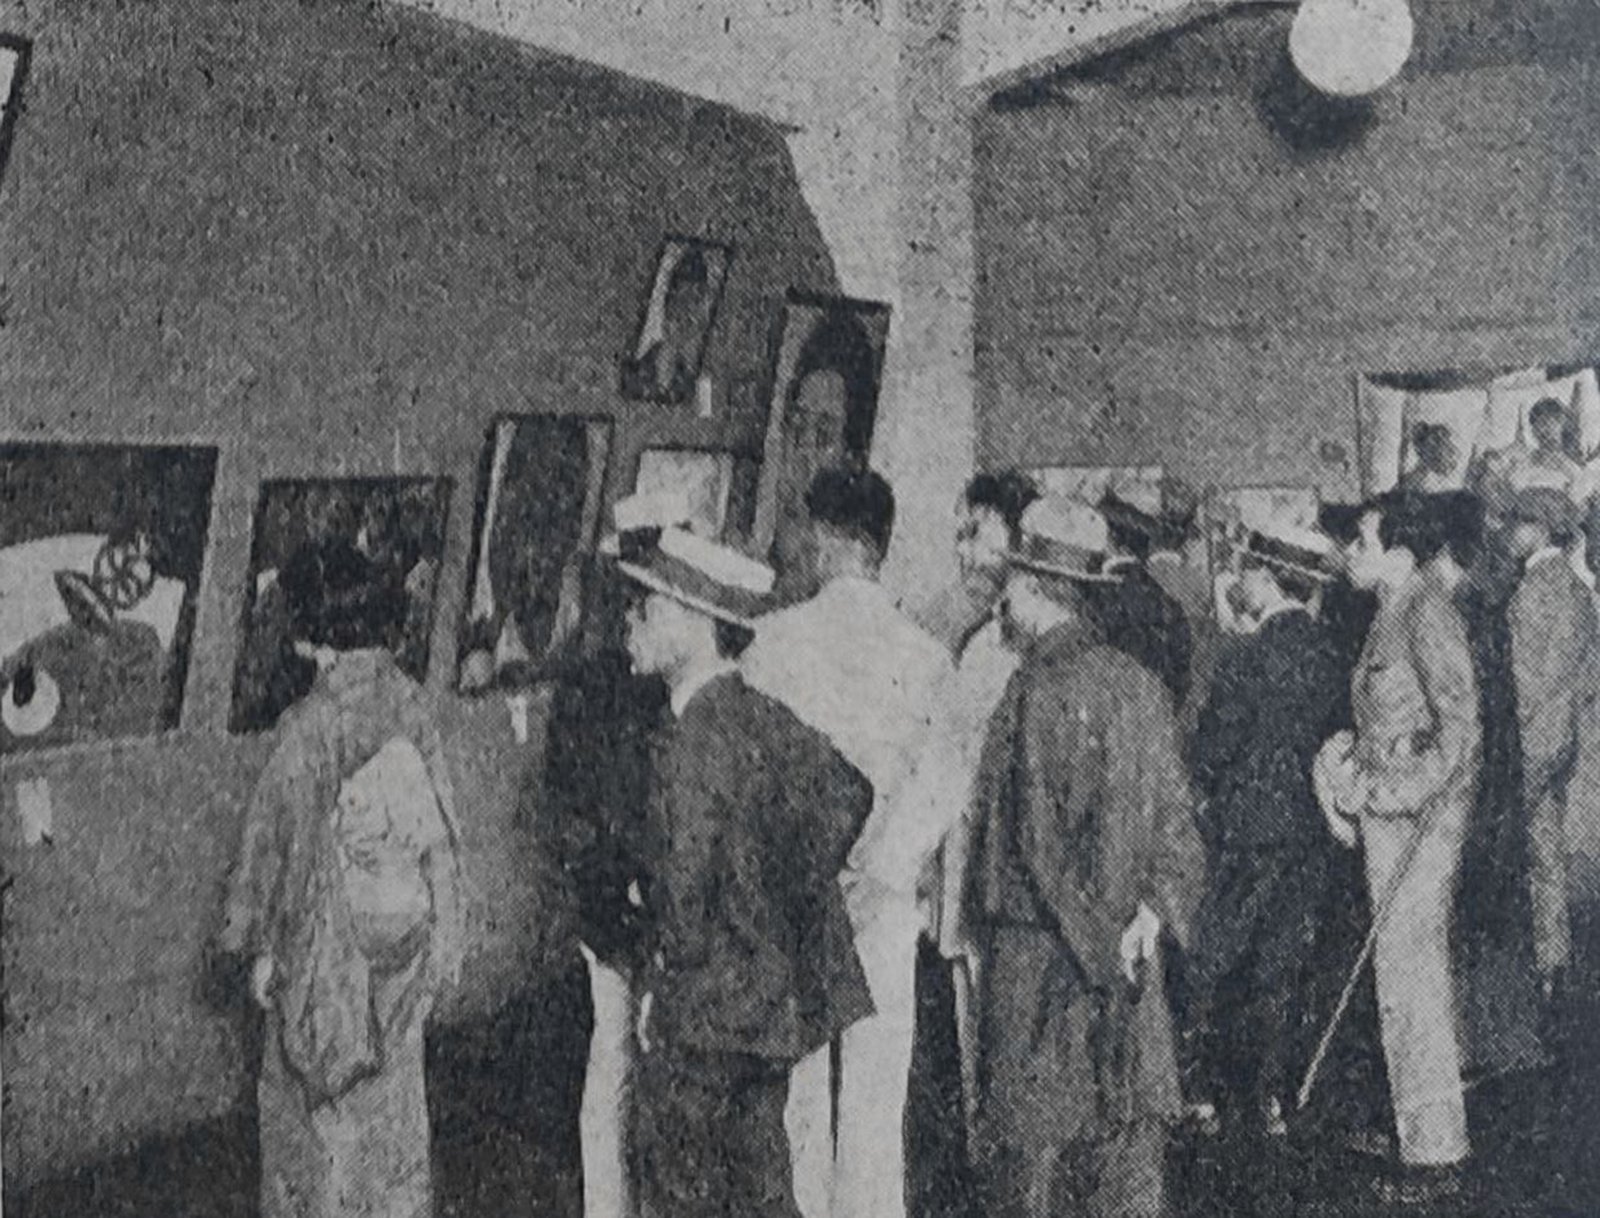 Eighth room of the exhibition of paintings by USSR artists in Osaka, 1927. Illustration from the newspaper Zhizn iskusstva, 34, 1927 Viktor Belozerov archive